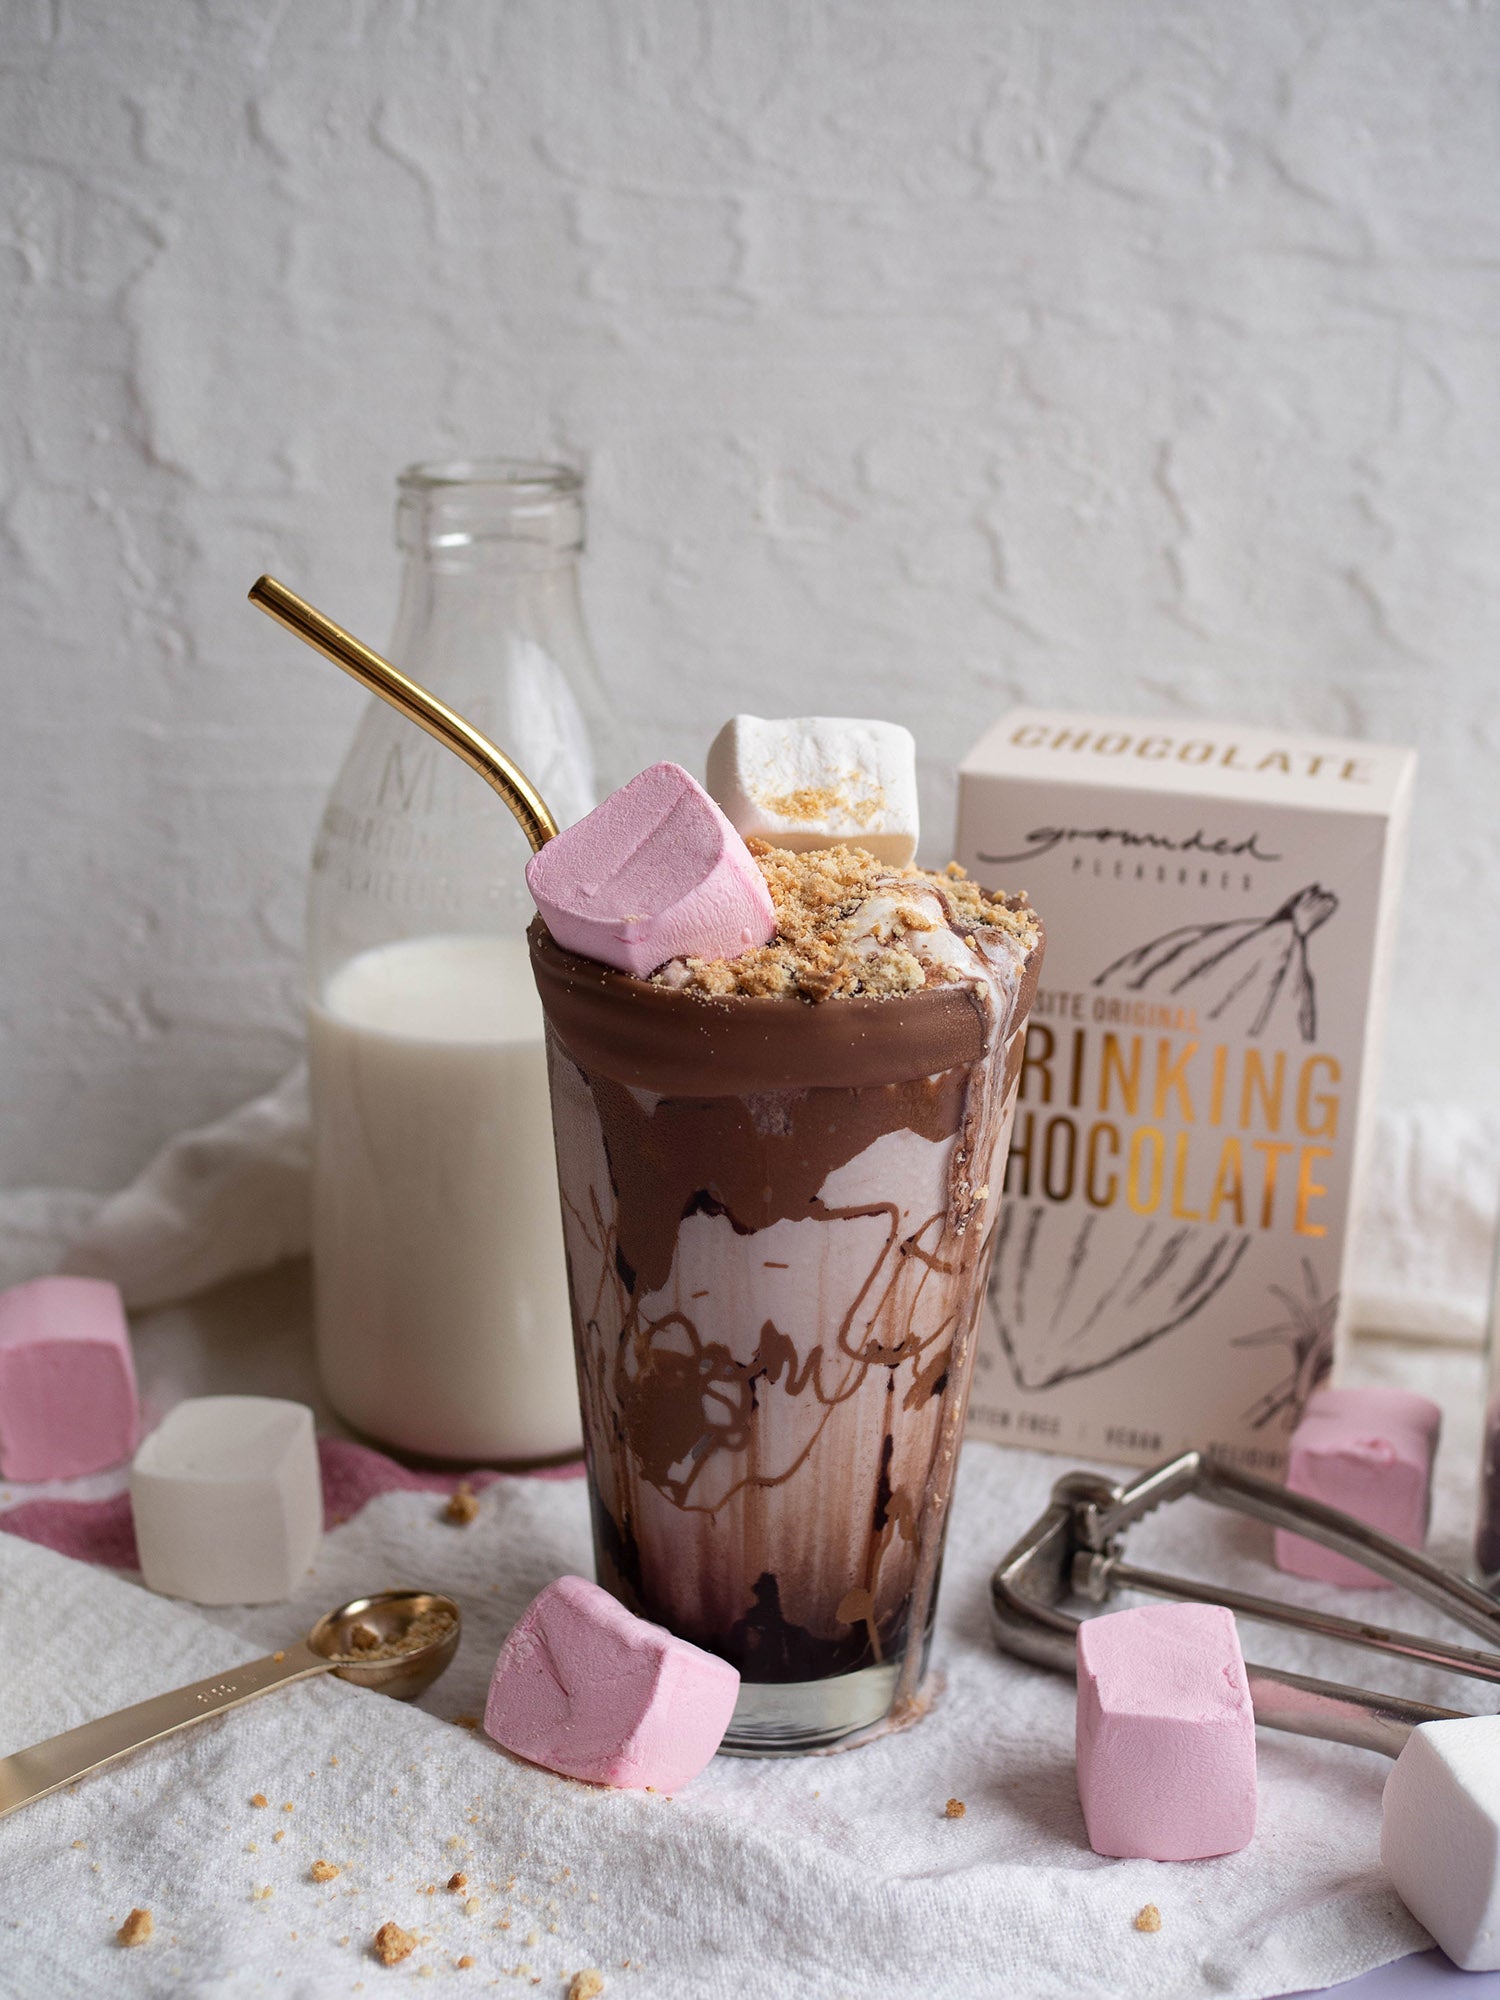 S'mores Inspired Iced Chocolate.